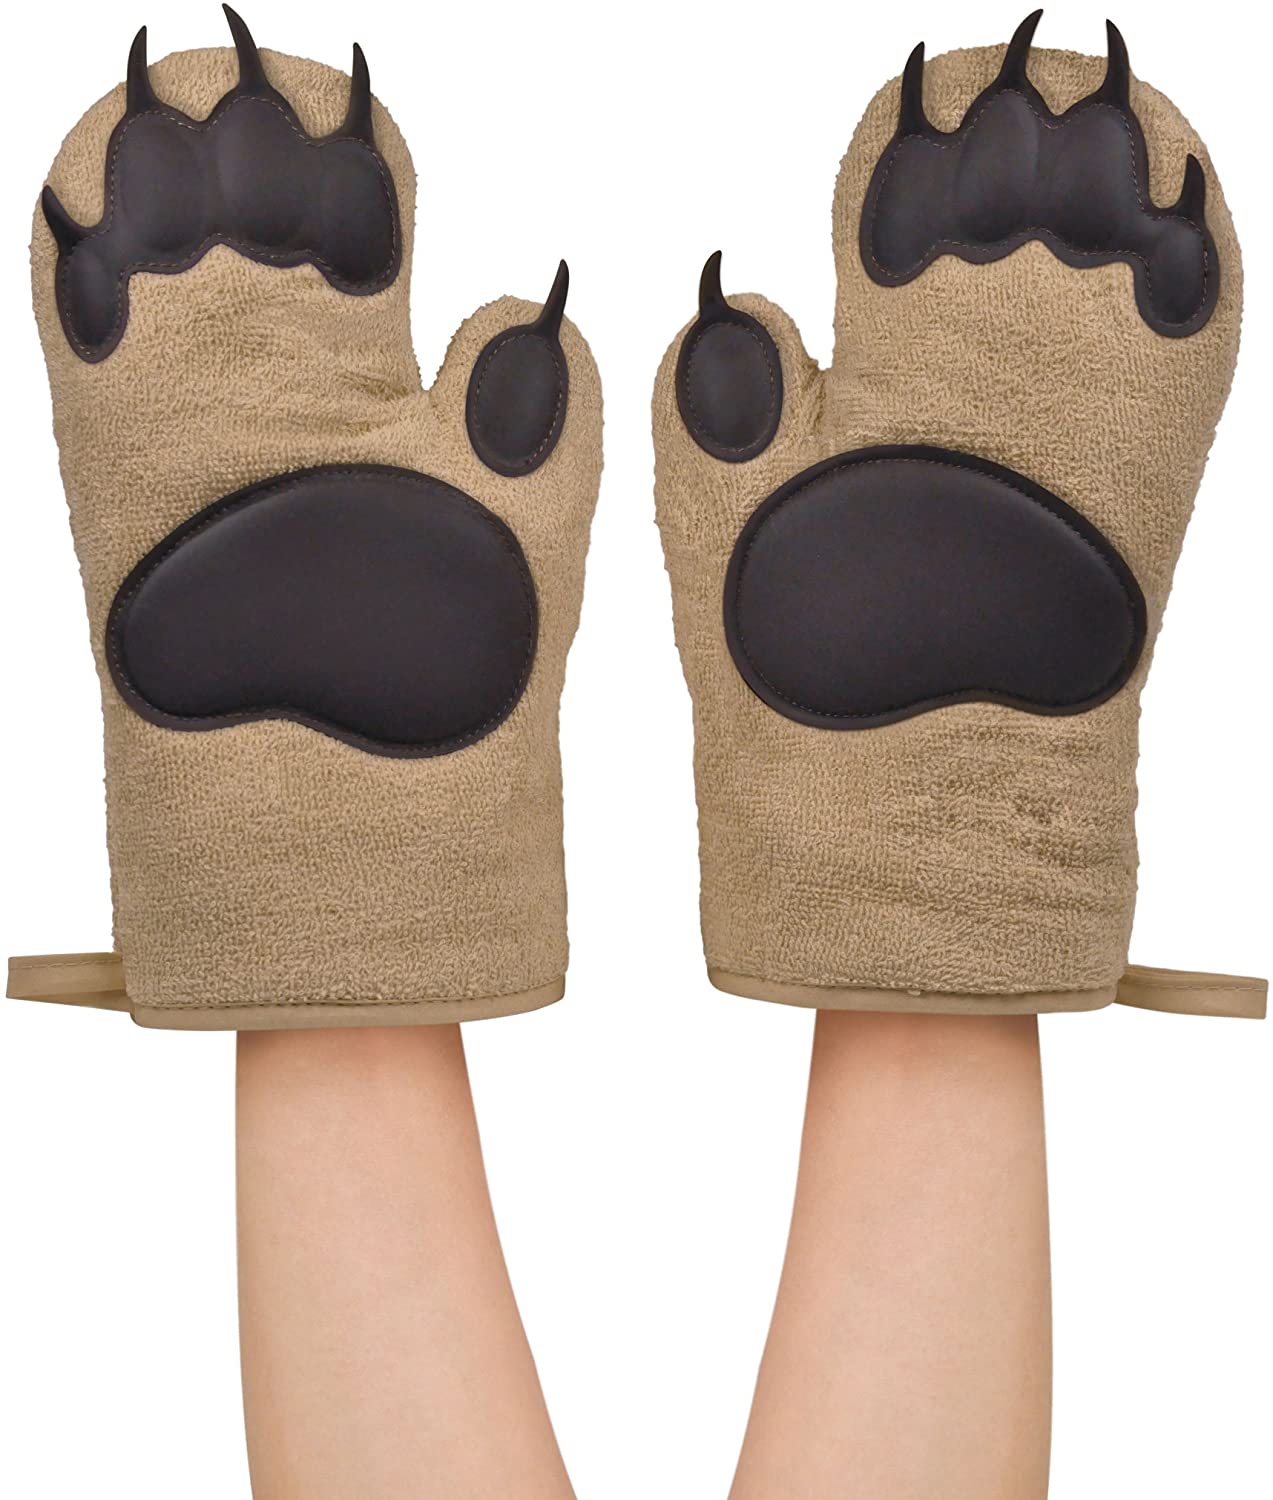 Bear Oven Mitts